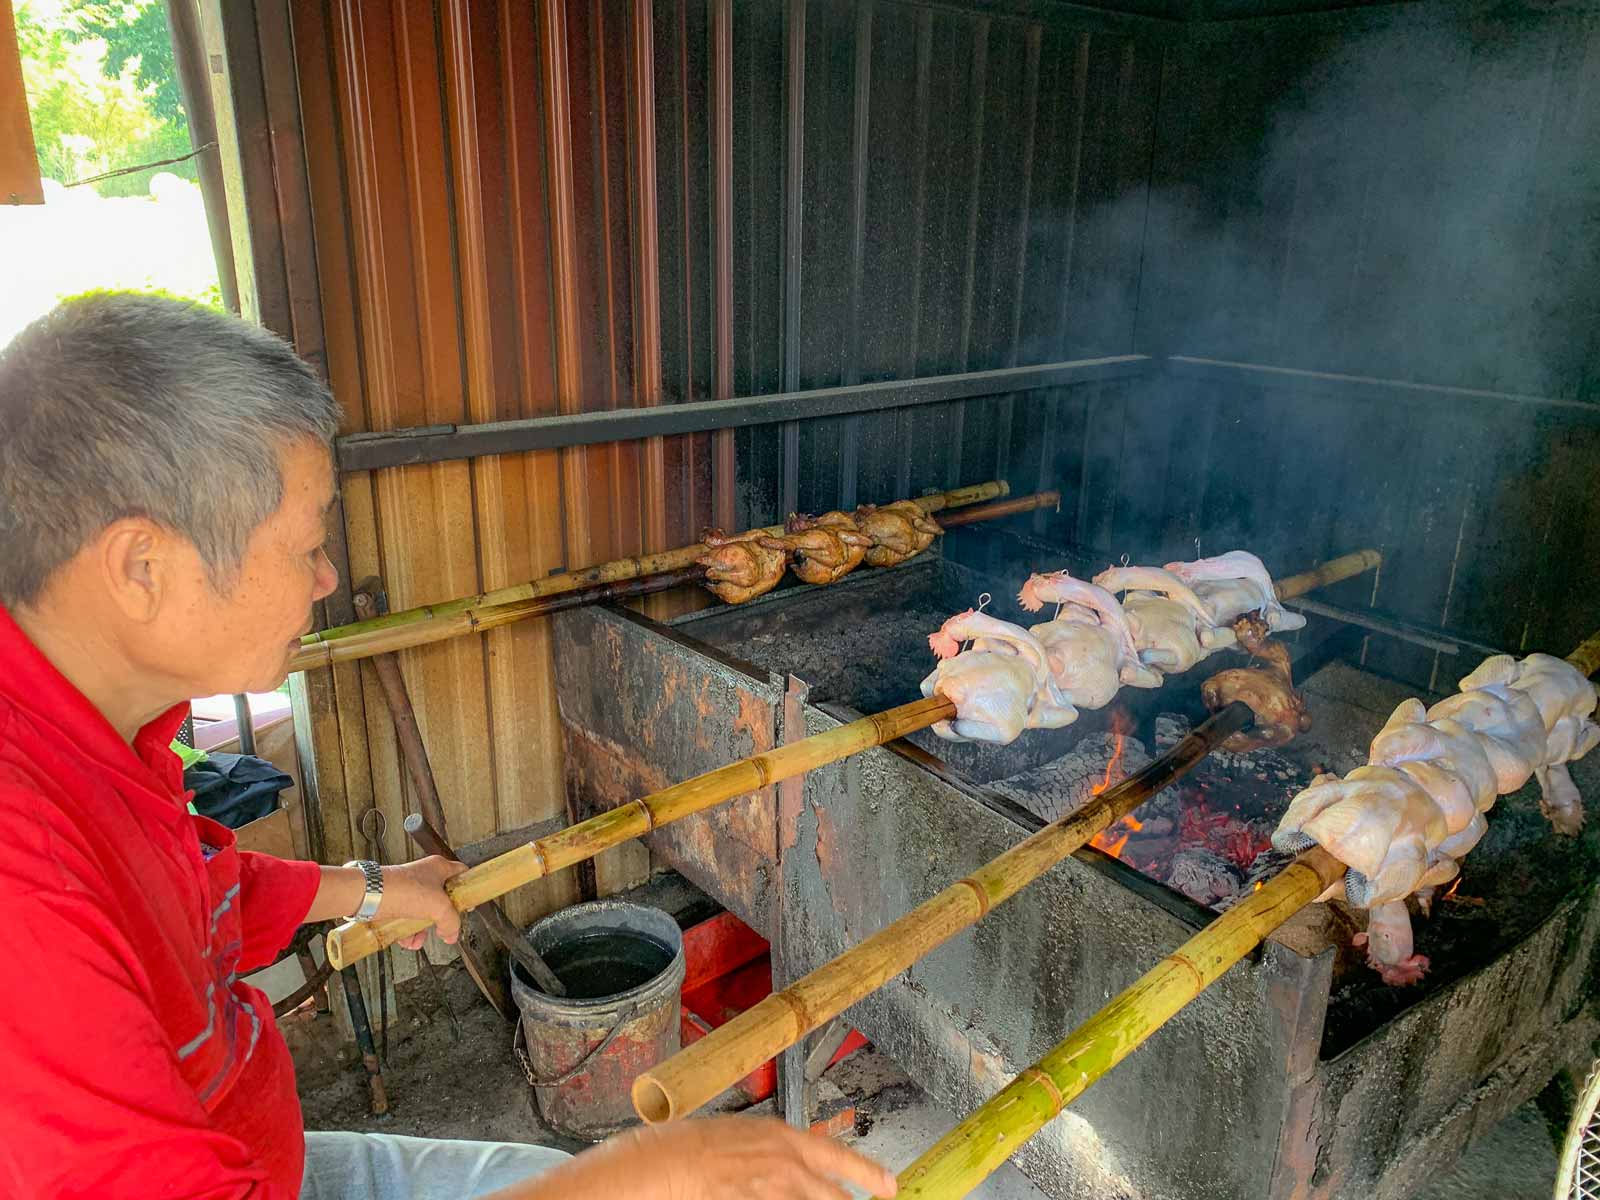 Chickens, mounted onto bamboo, are roasted over an open fire.